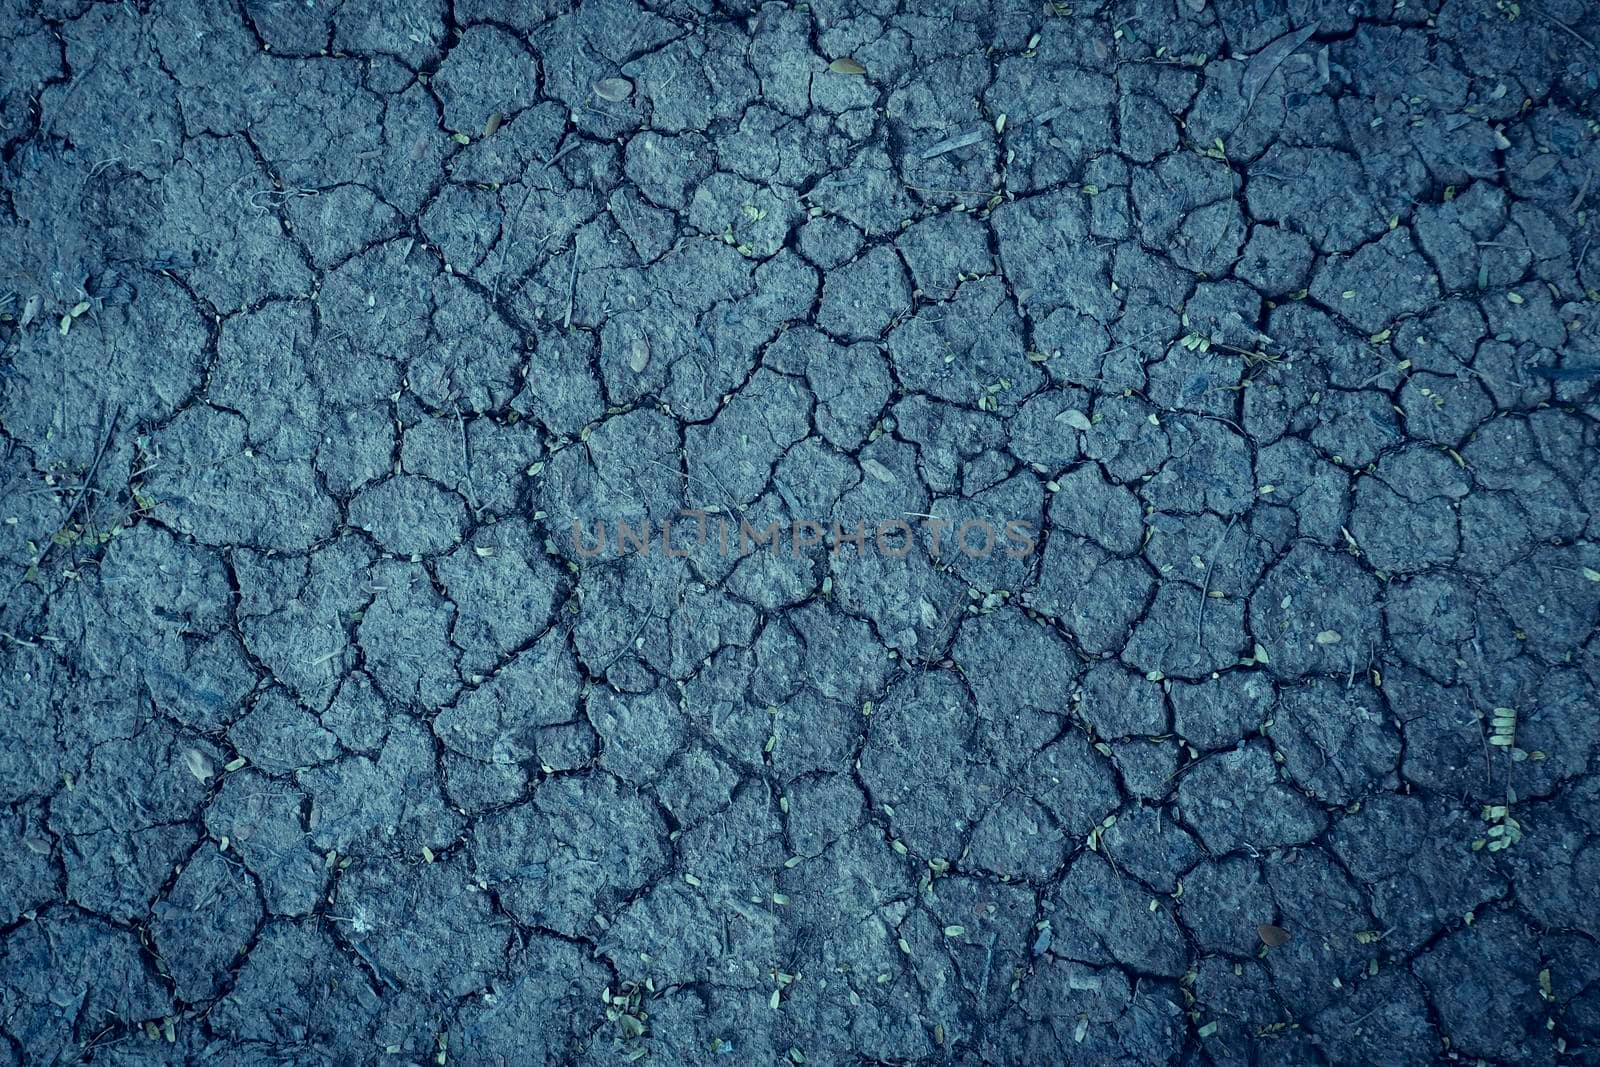 Cracked dry earth soil after no rain water longtime, abstract sad dry background